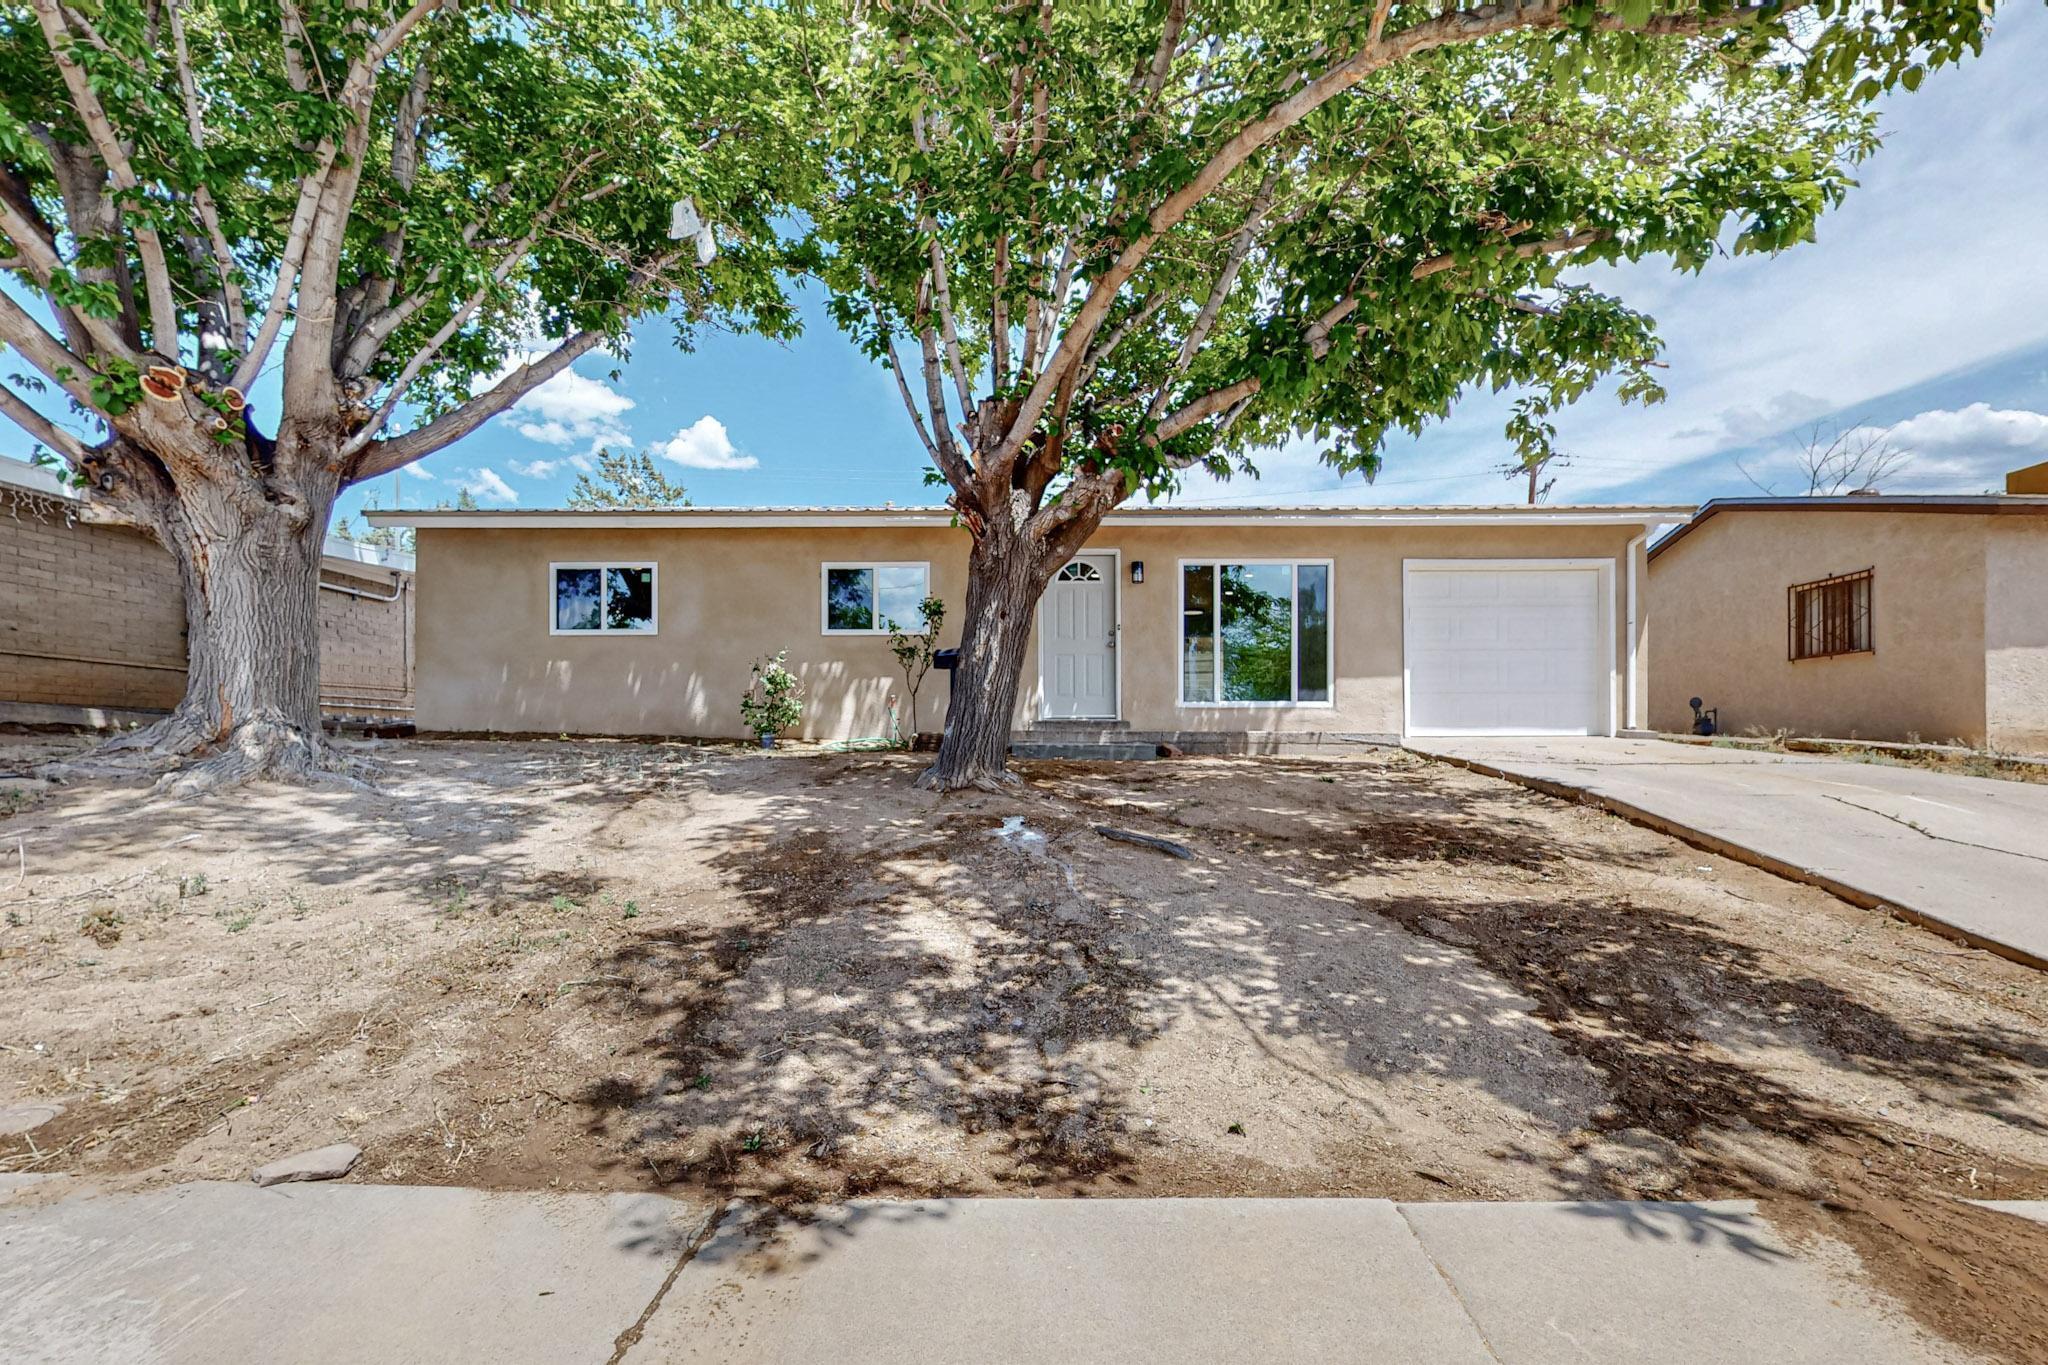 LOCATION. Close to base, freeway and shopping! New metal roof, HVAC, refrigerated air, stucco, windows, appliances, LV flooring, cabinets, bathroom. Upgraded electric box/wiring and new garage door! New LG appliances that convey with the home! Won't last! Must see! Large yard ready for you to landscape.